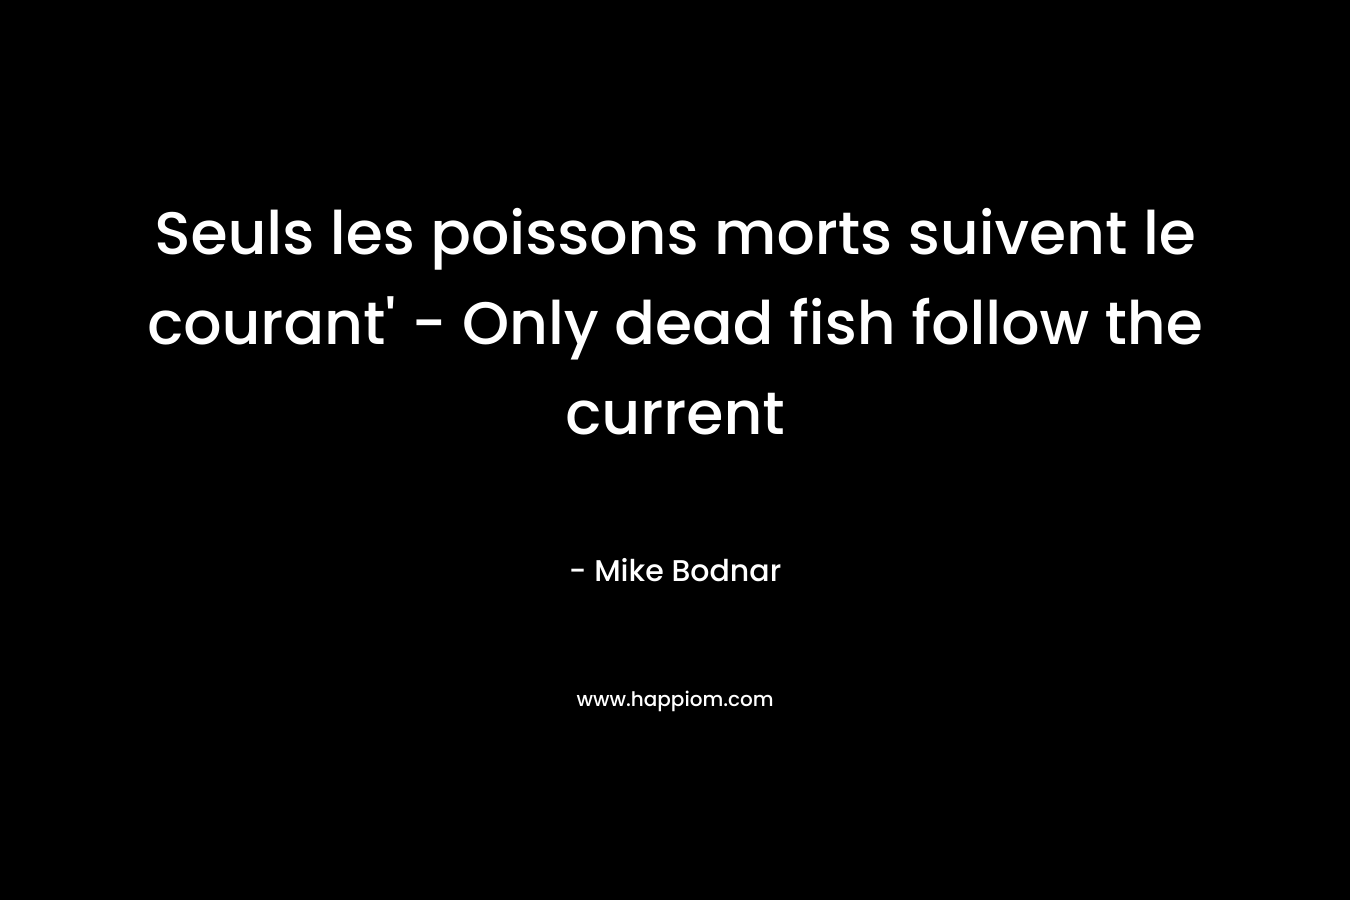 Seuls les poissons morts suivent le courant’ – Only dead fish follow the current – Mike Bodnar